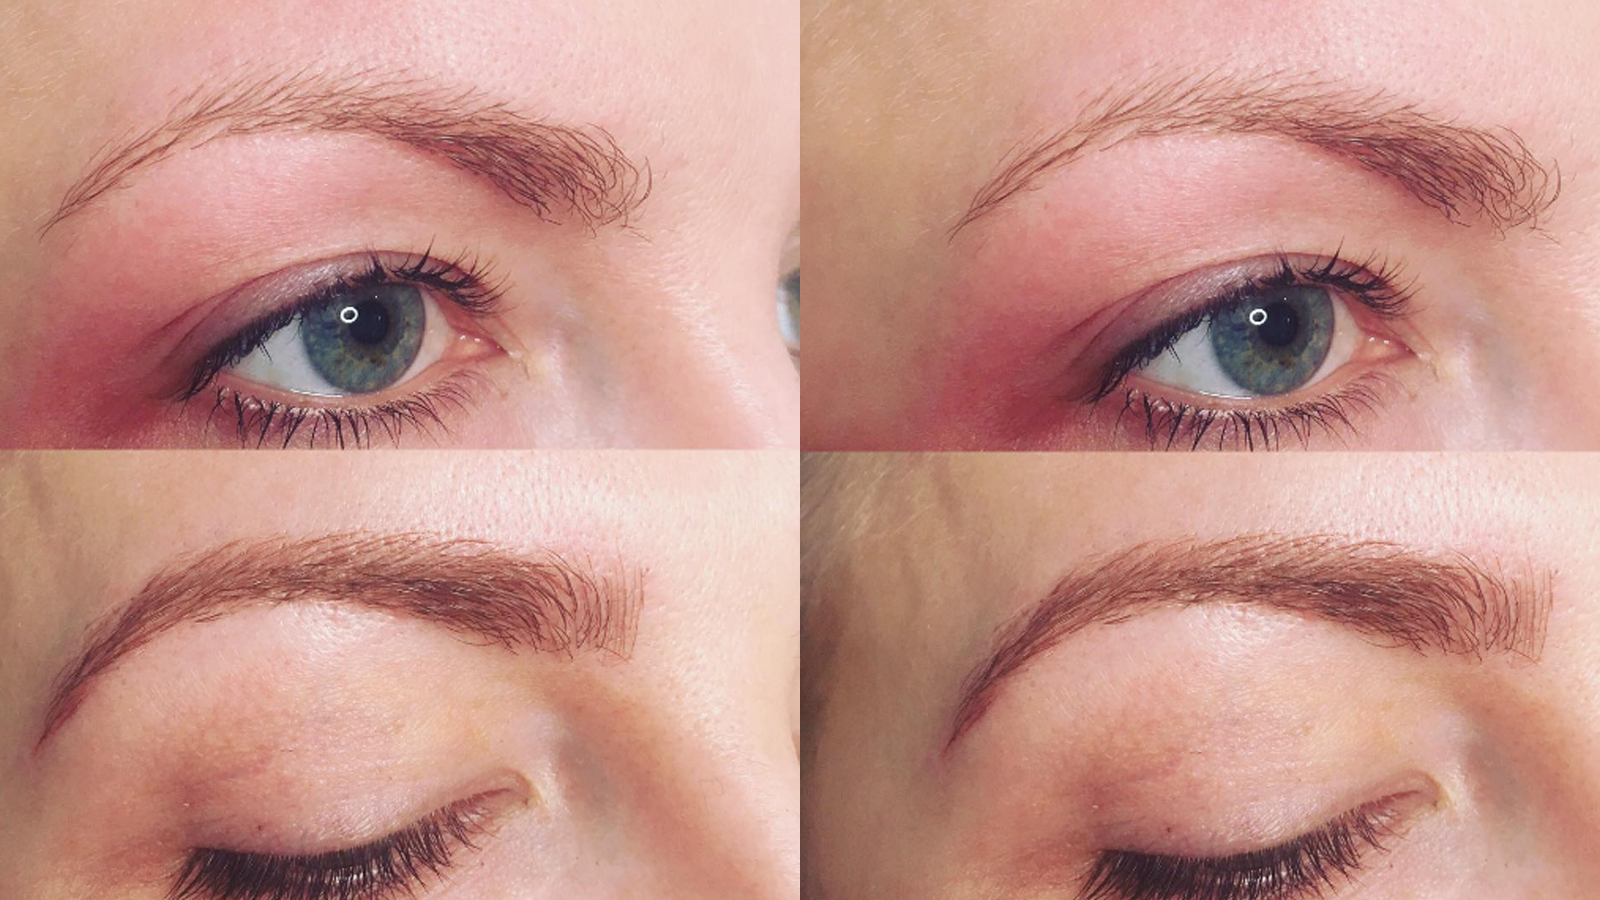 OMG Eyebrow Microblading Is the Best Thing I've Ever Done ...